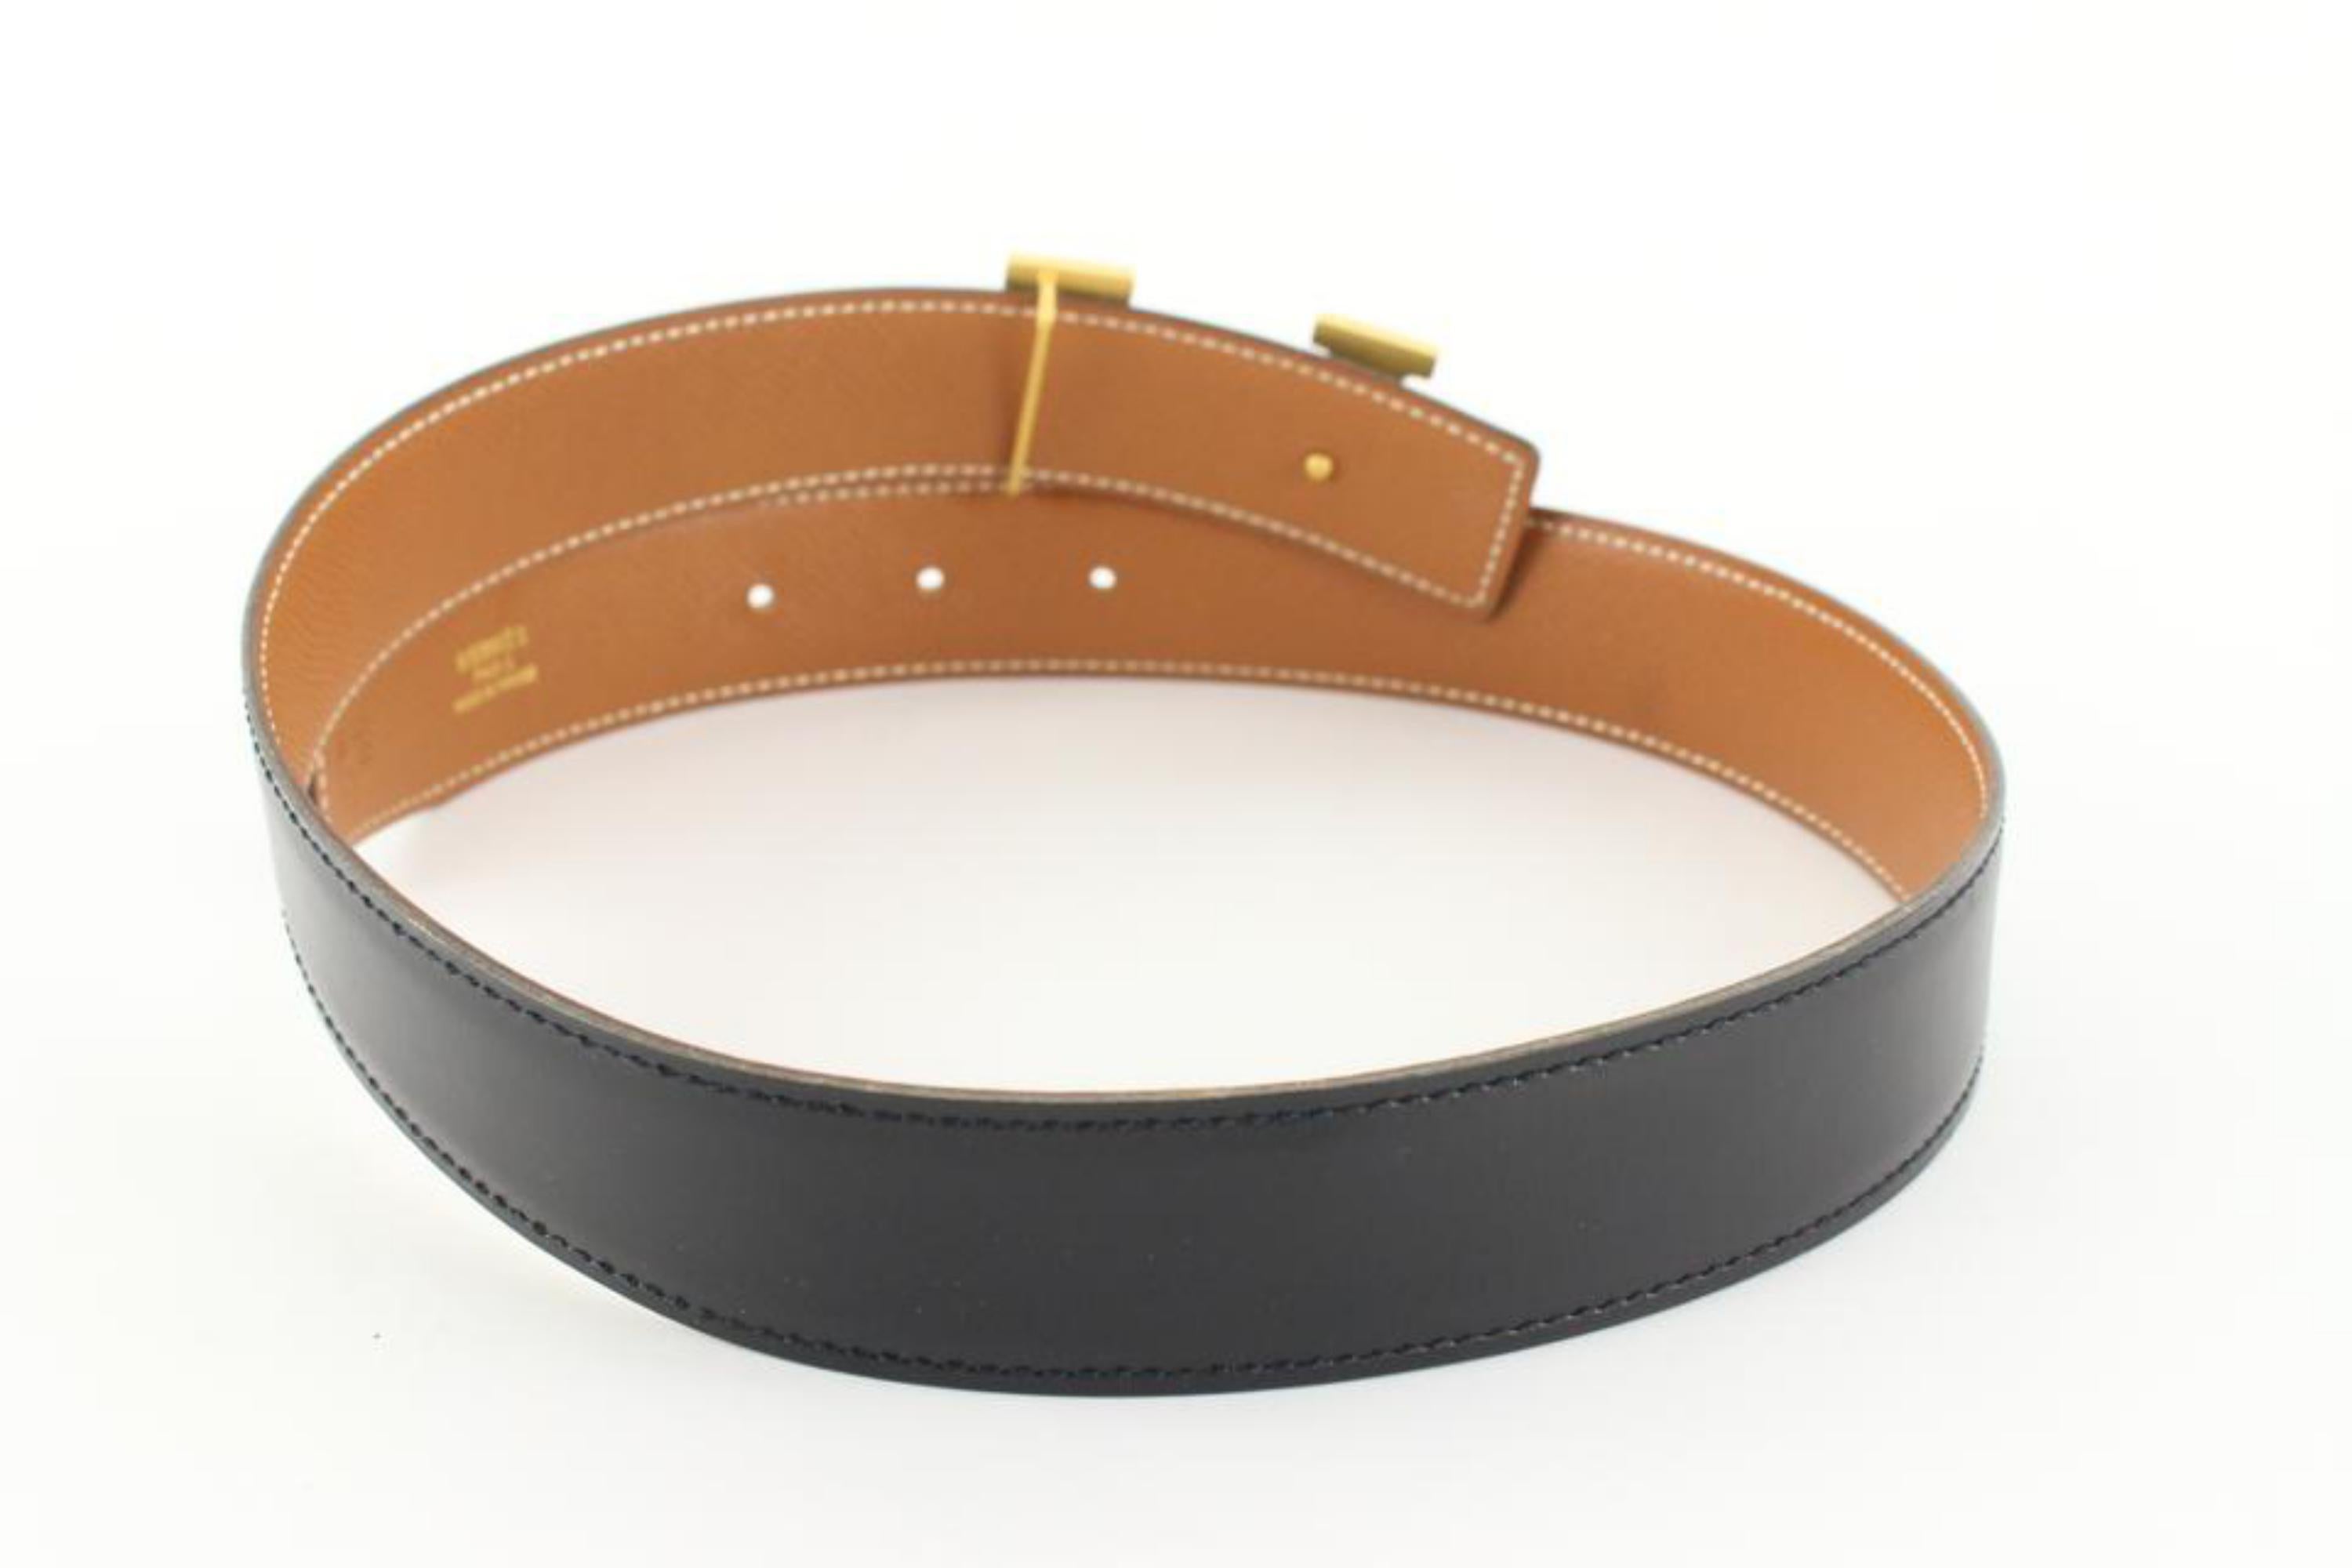 Hermès 32mm Black x Brown Reversible H Logo Belt Kit 93h719s In Good Condition For Sale In Dix hills, NY